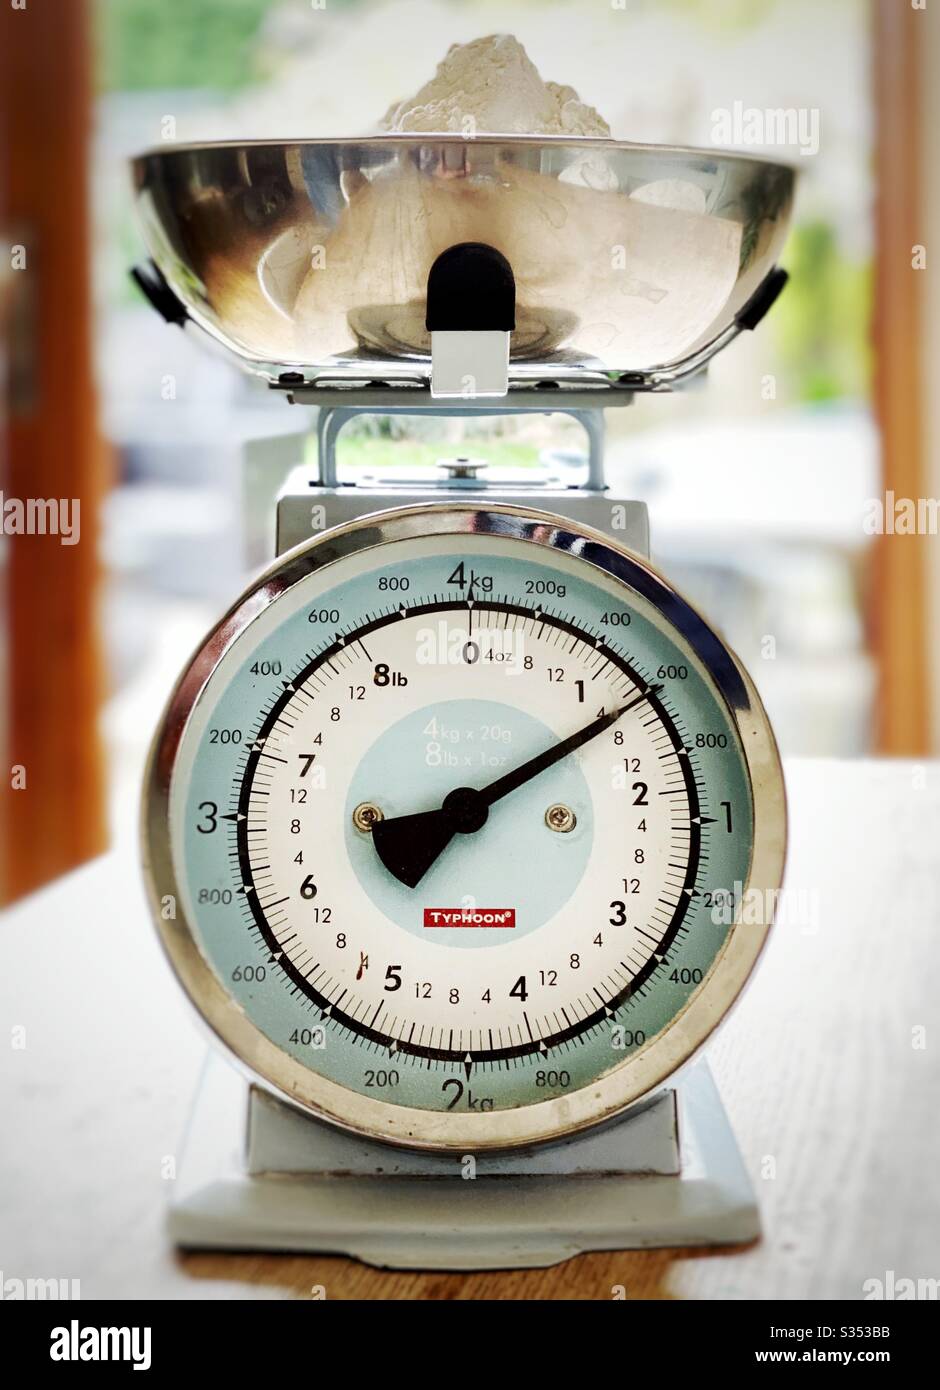 https://c8.alamy.com/comp/S353BB/bread-flour-in-weighing-scales-S353BB.jpg